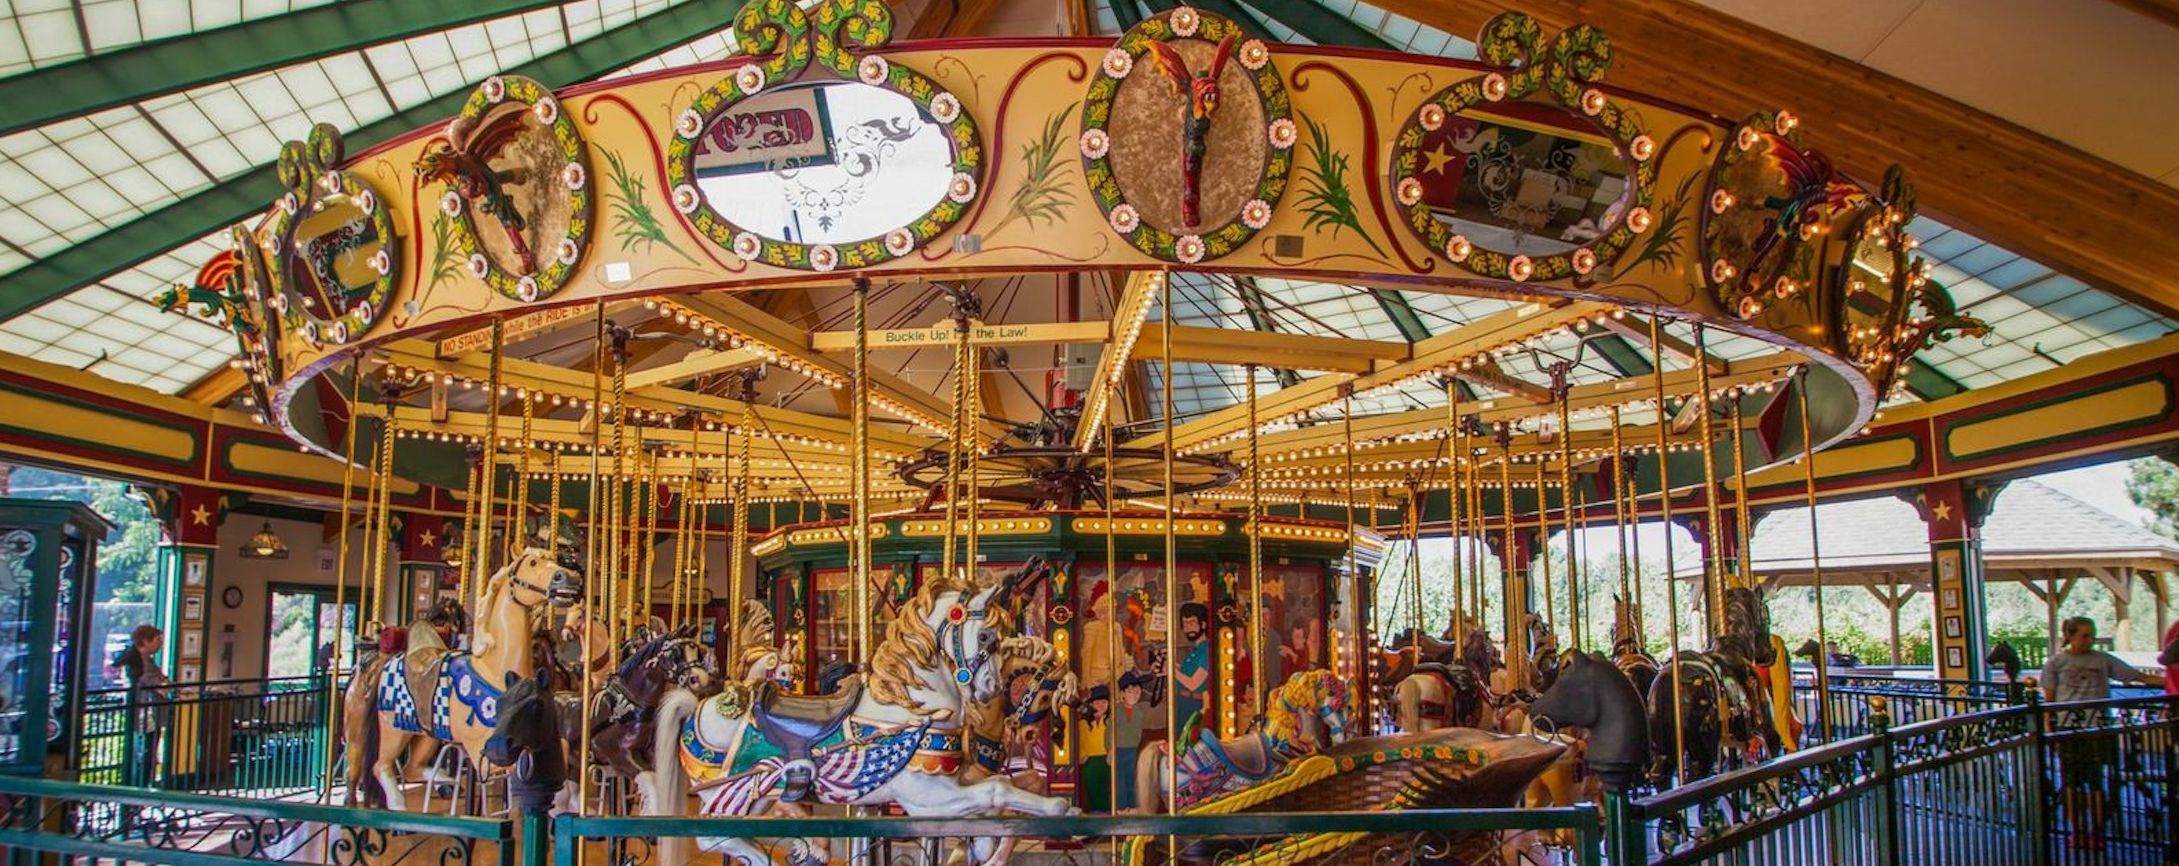 Winter at A Carousel for Missoula